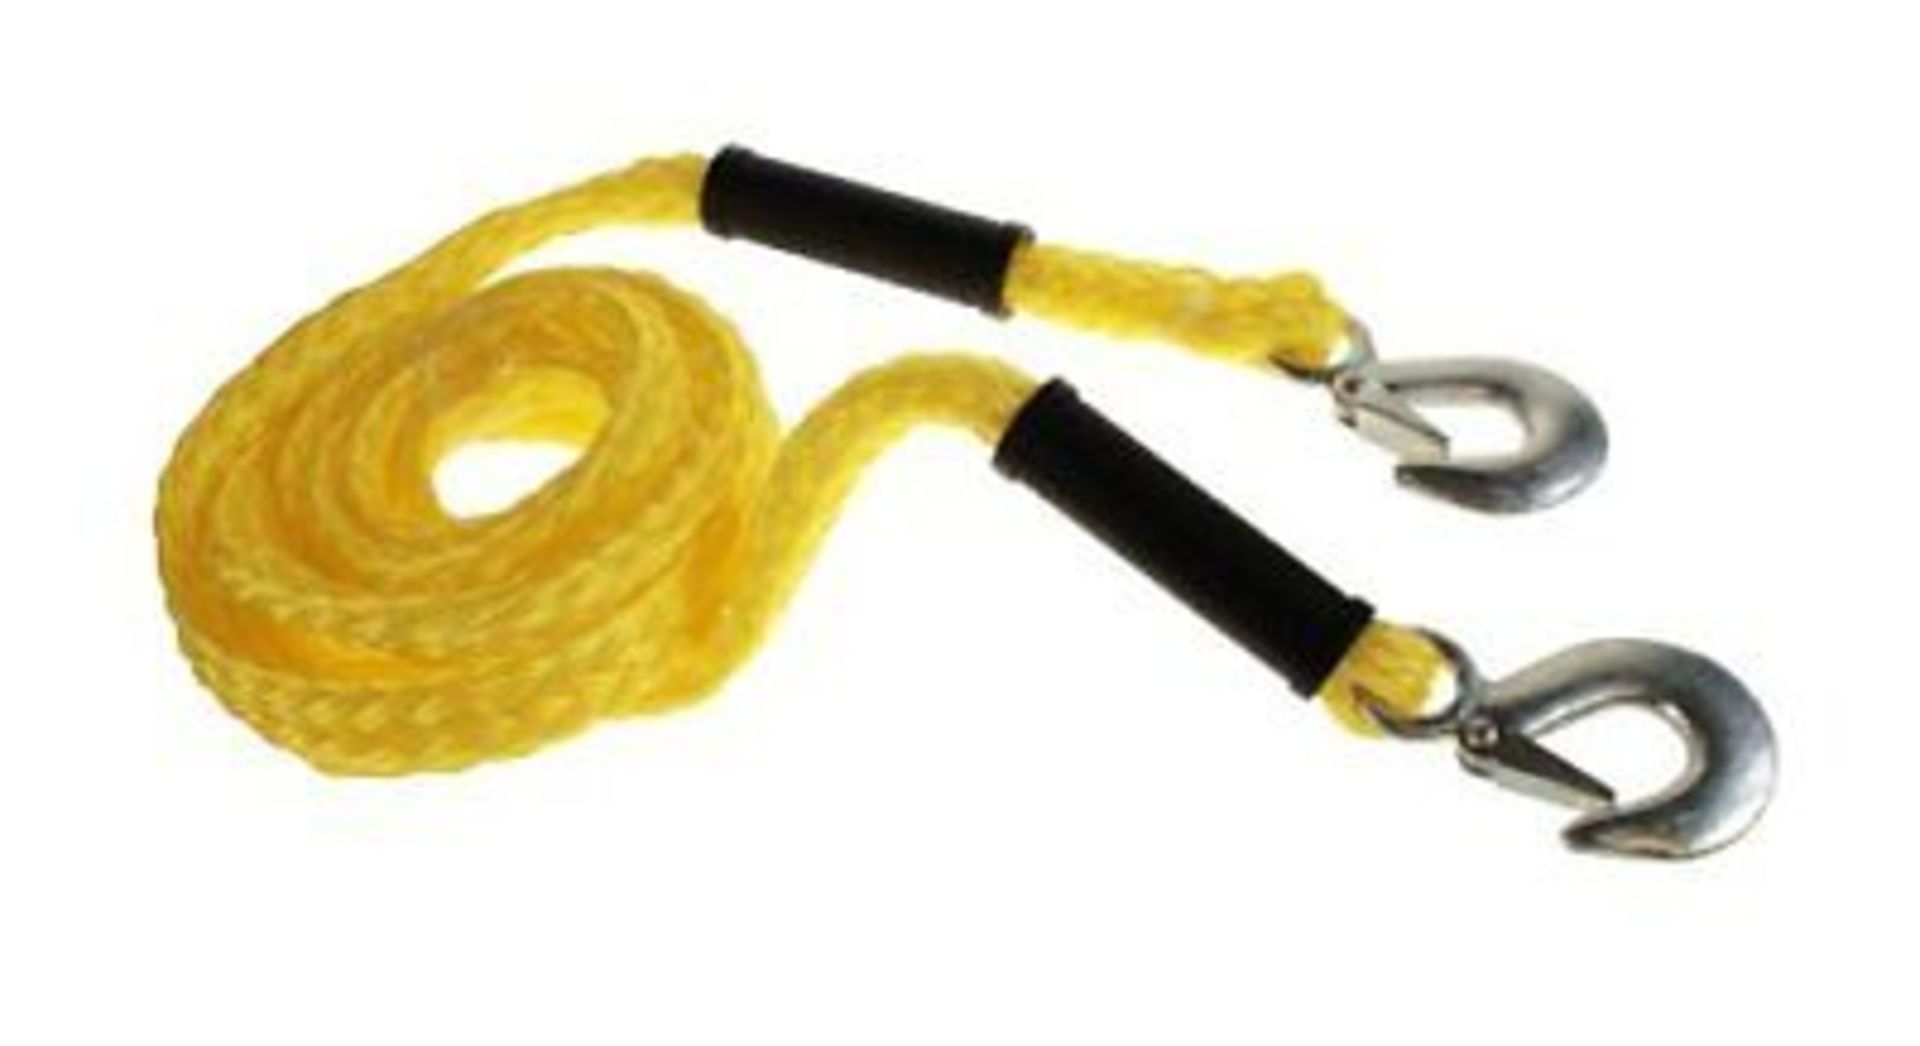 V Brand New 4 metre Tow Rope With Steel Hooks - Suitable For Vehicles Up To 2000kg - Includes